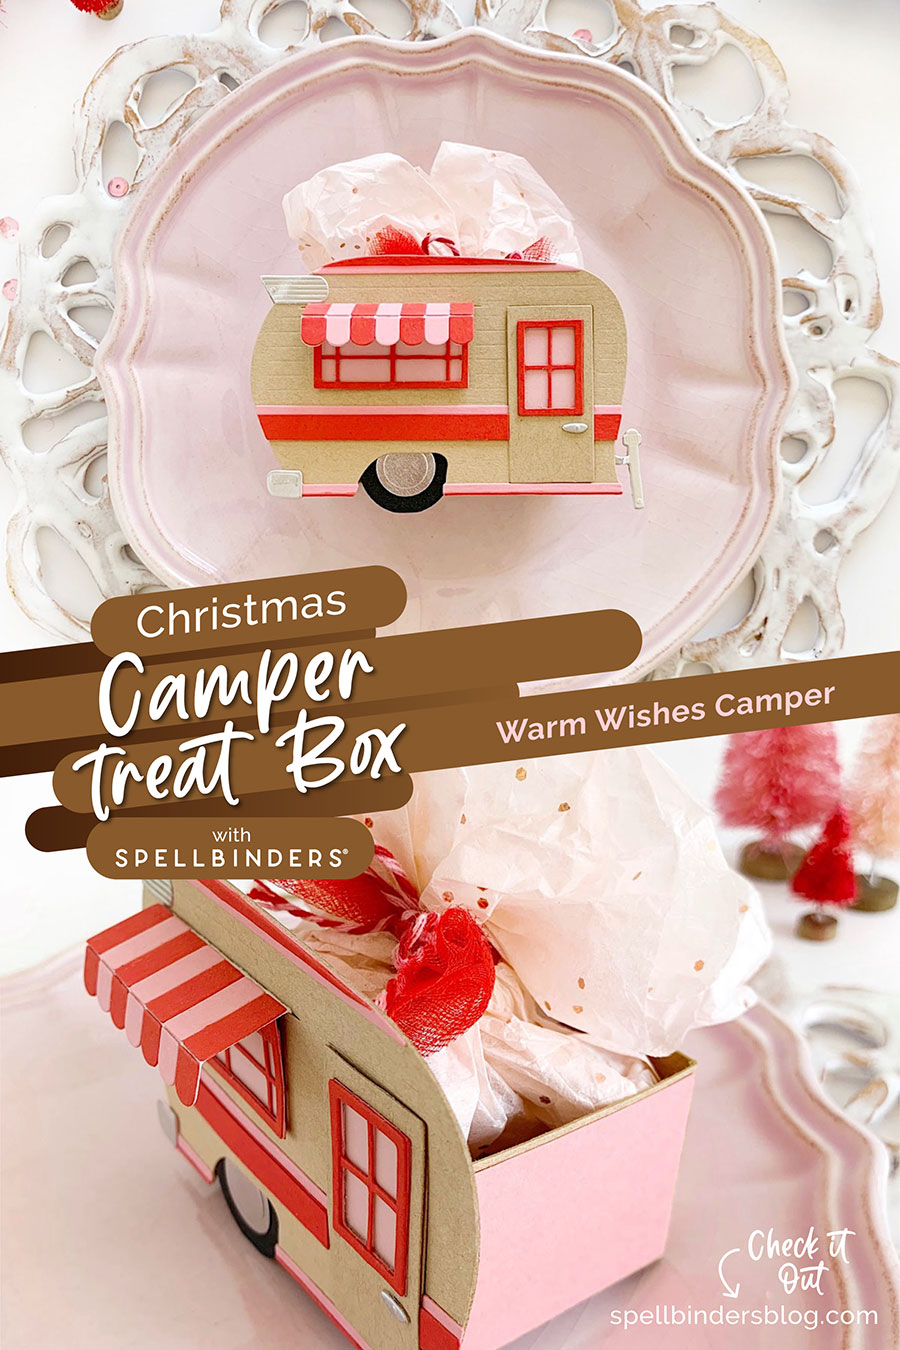 Warm Wishes Camper Collection Inspiration with Angela Tombari